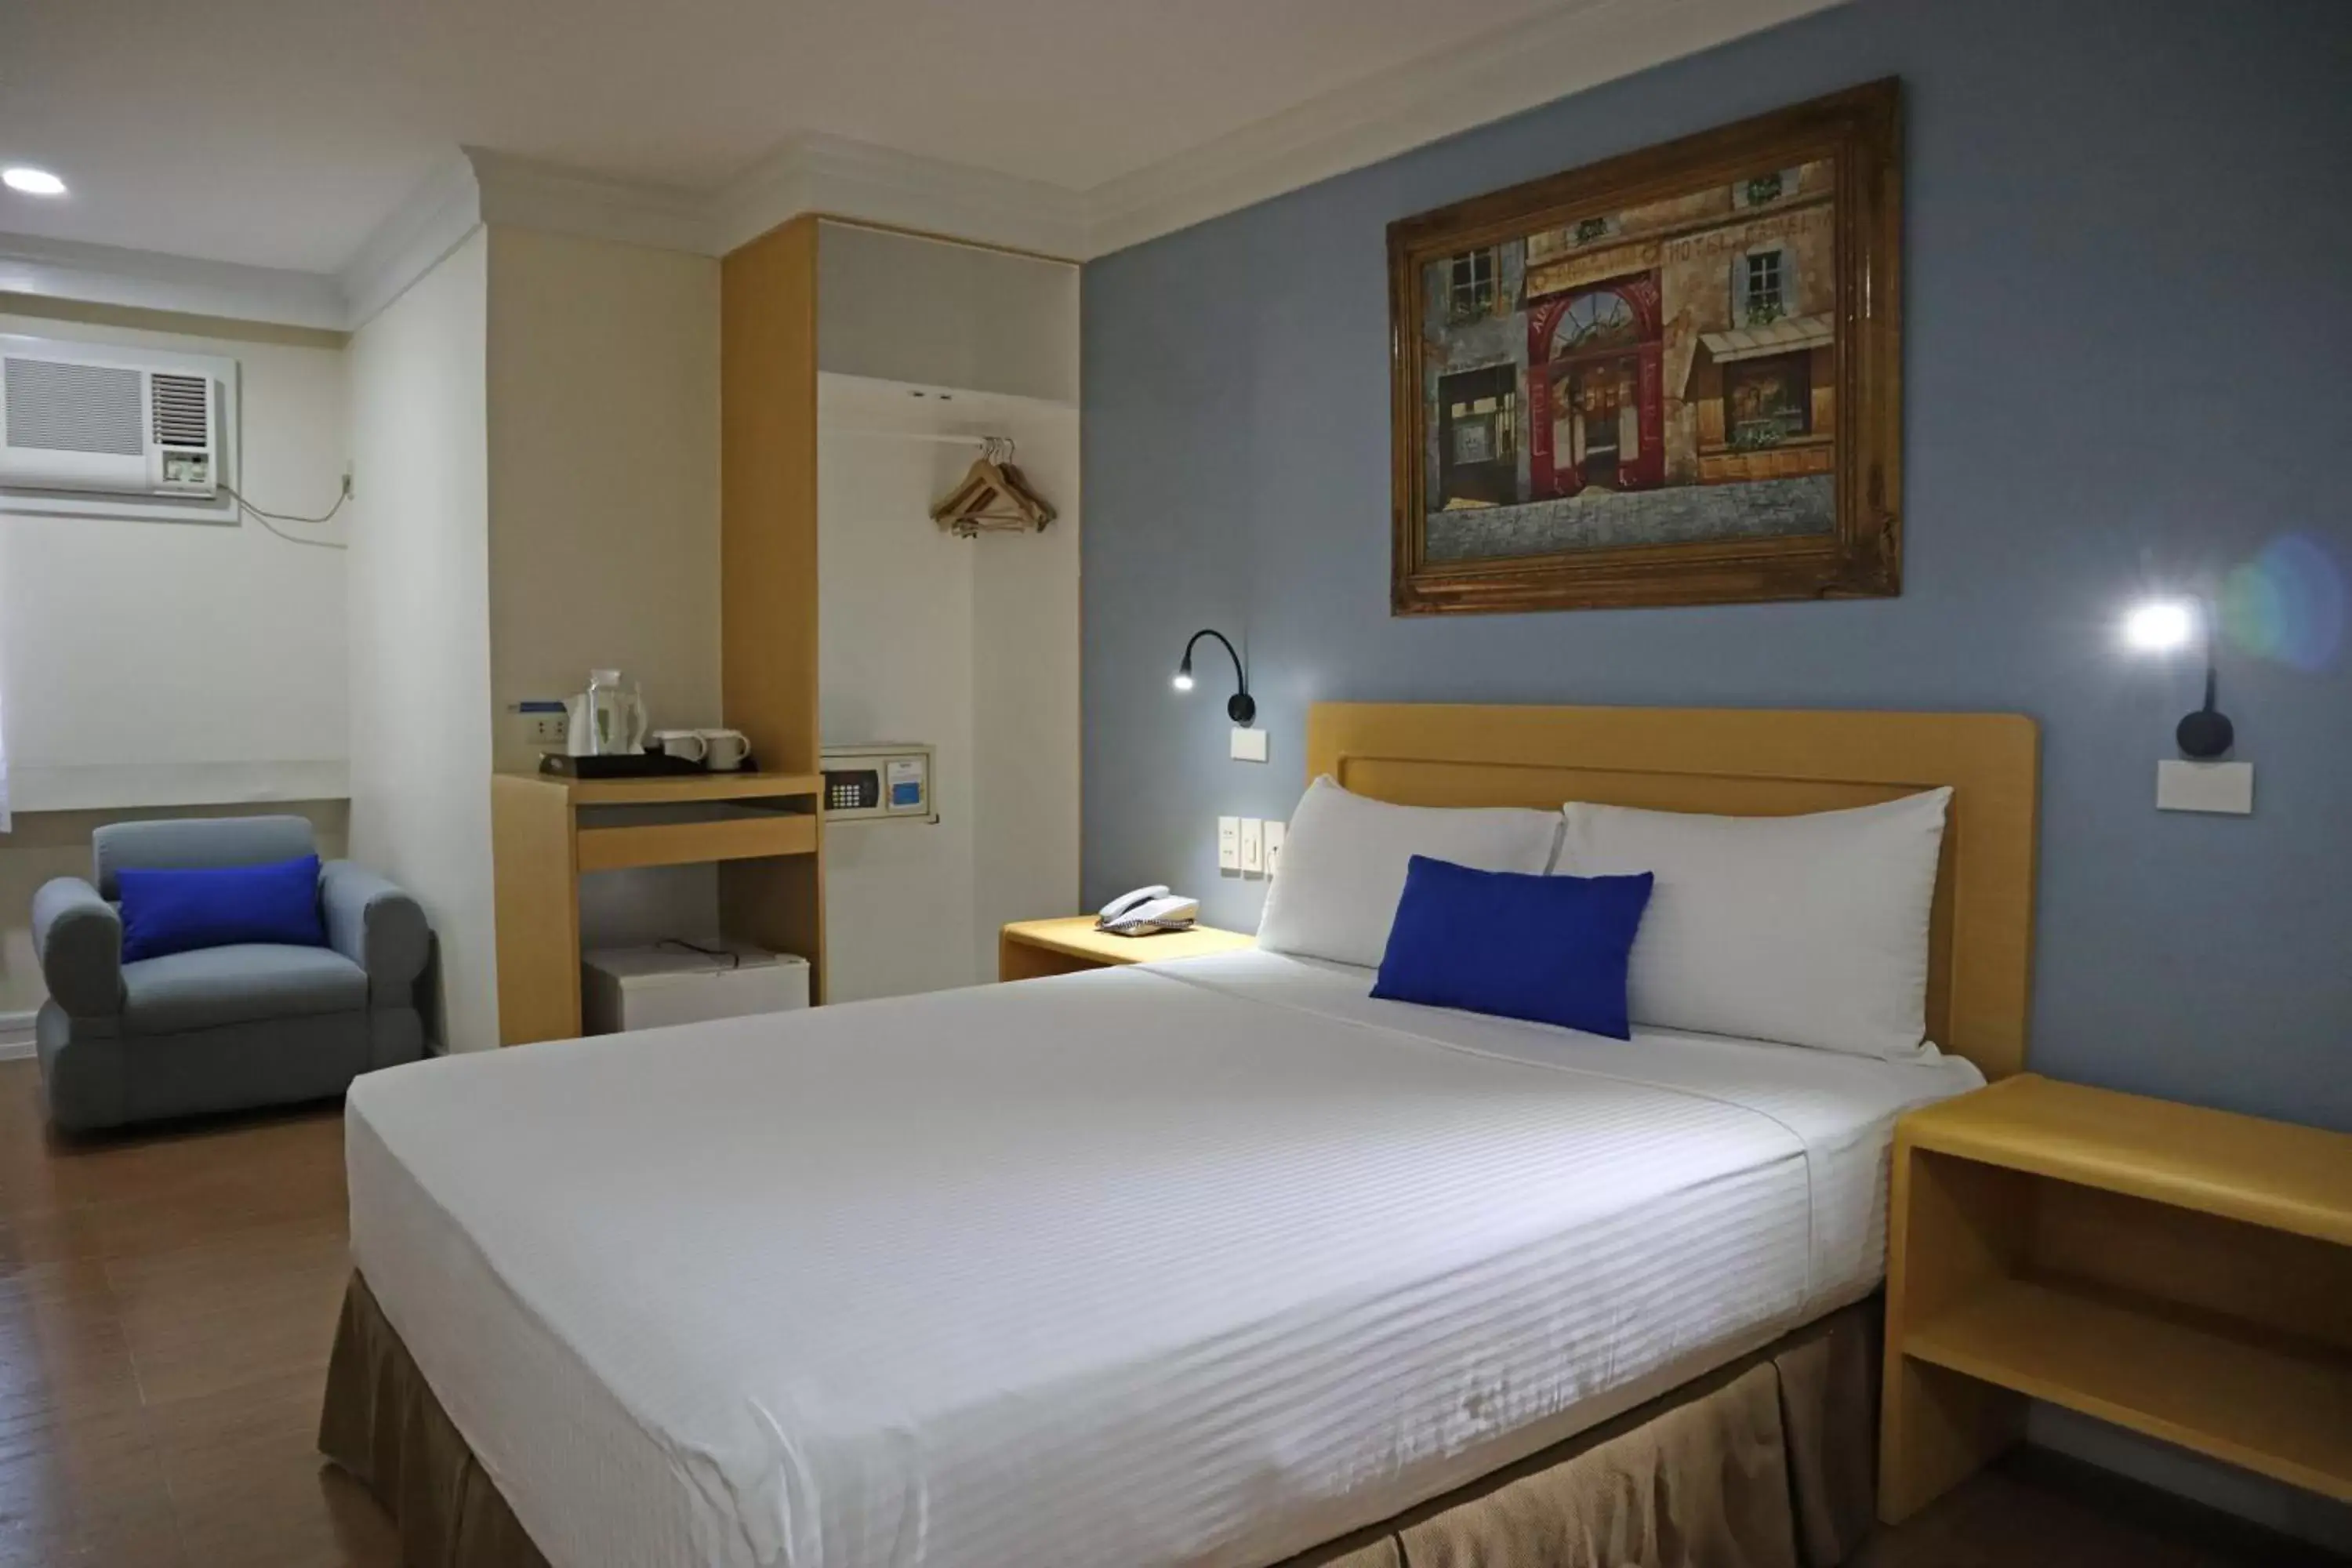 Bed in Fersal Hotel Malakas, Quezon City